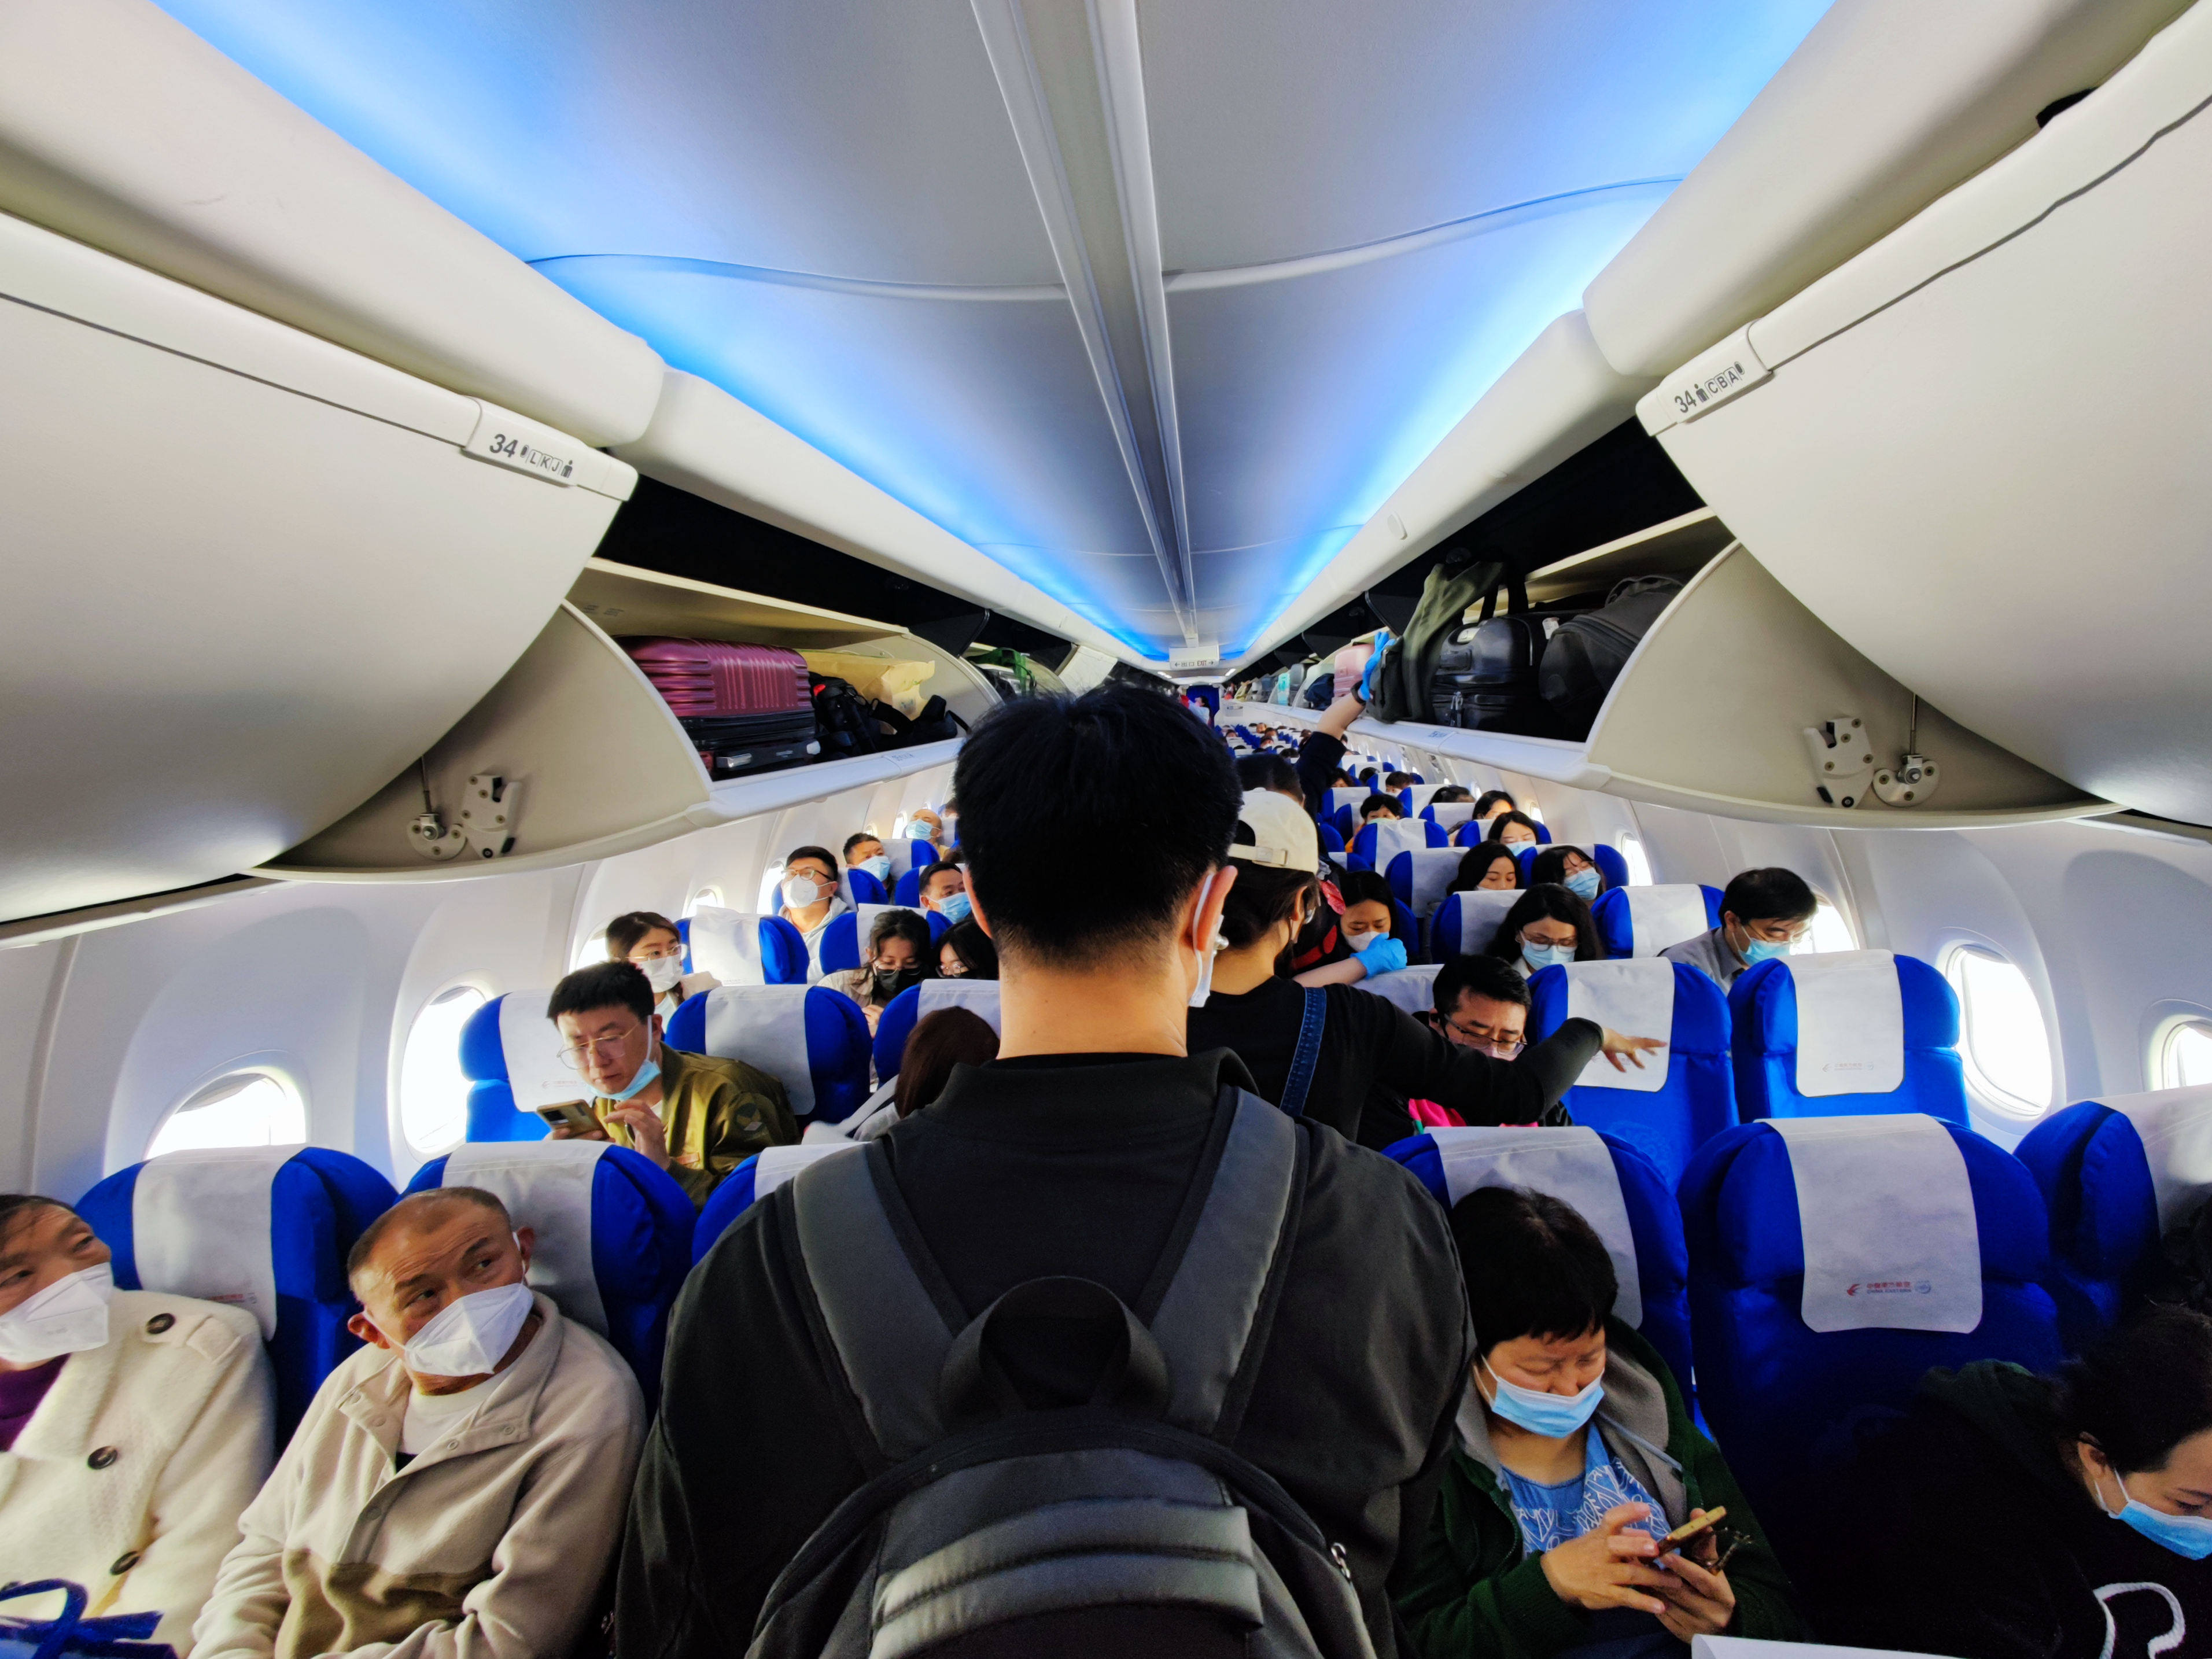 China’s inbound travel has not shown rapid recovery as of the third quarter, but the resumption of flights should lead to better numbers next year. Photo: Future Publishing via Getty Images